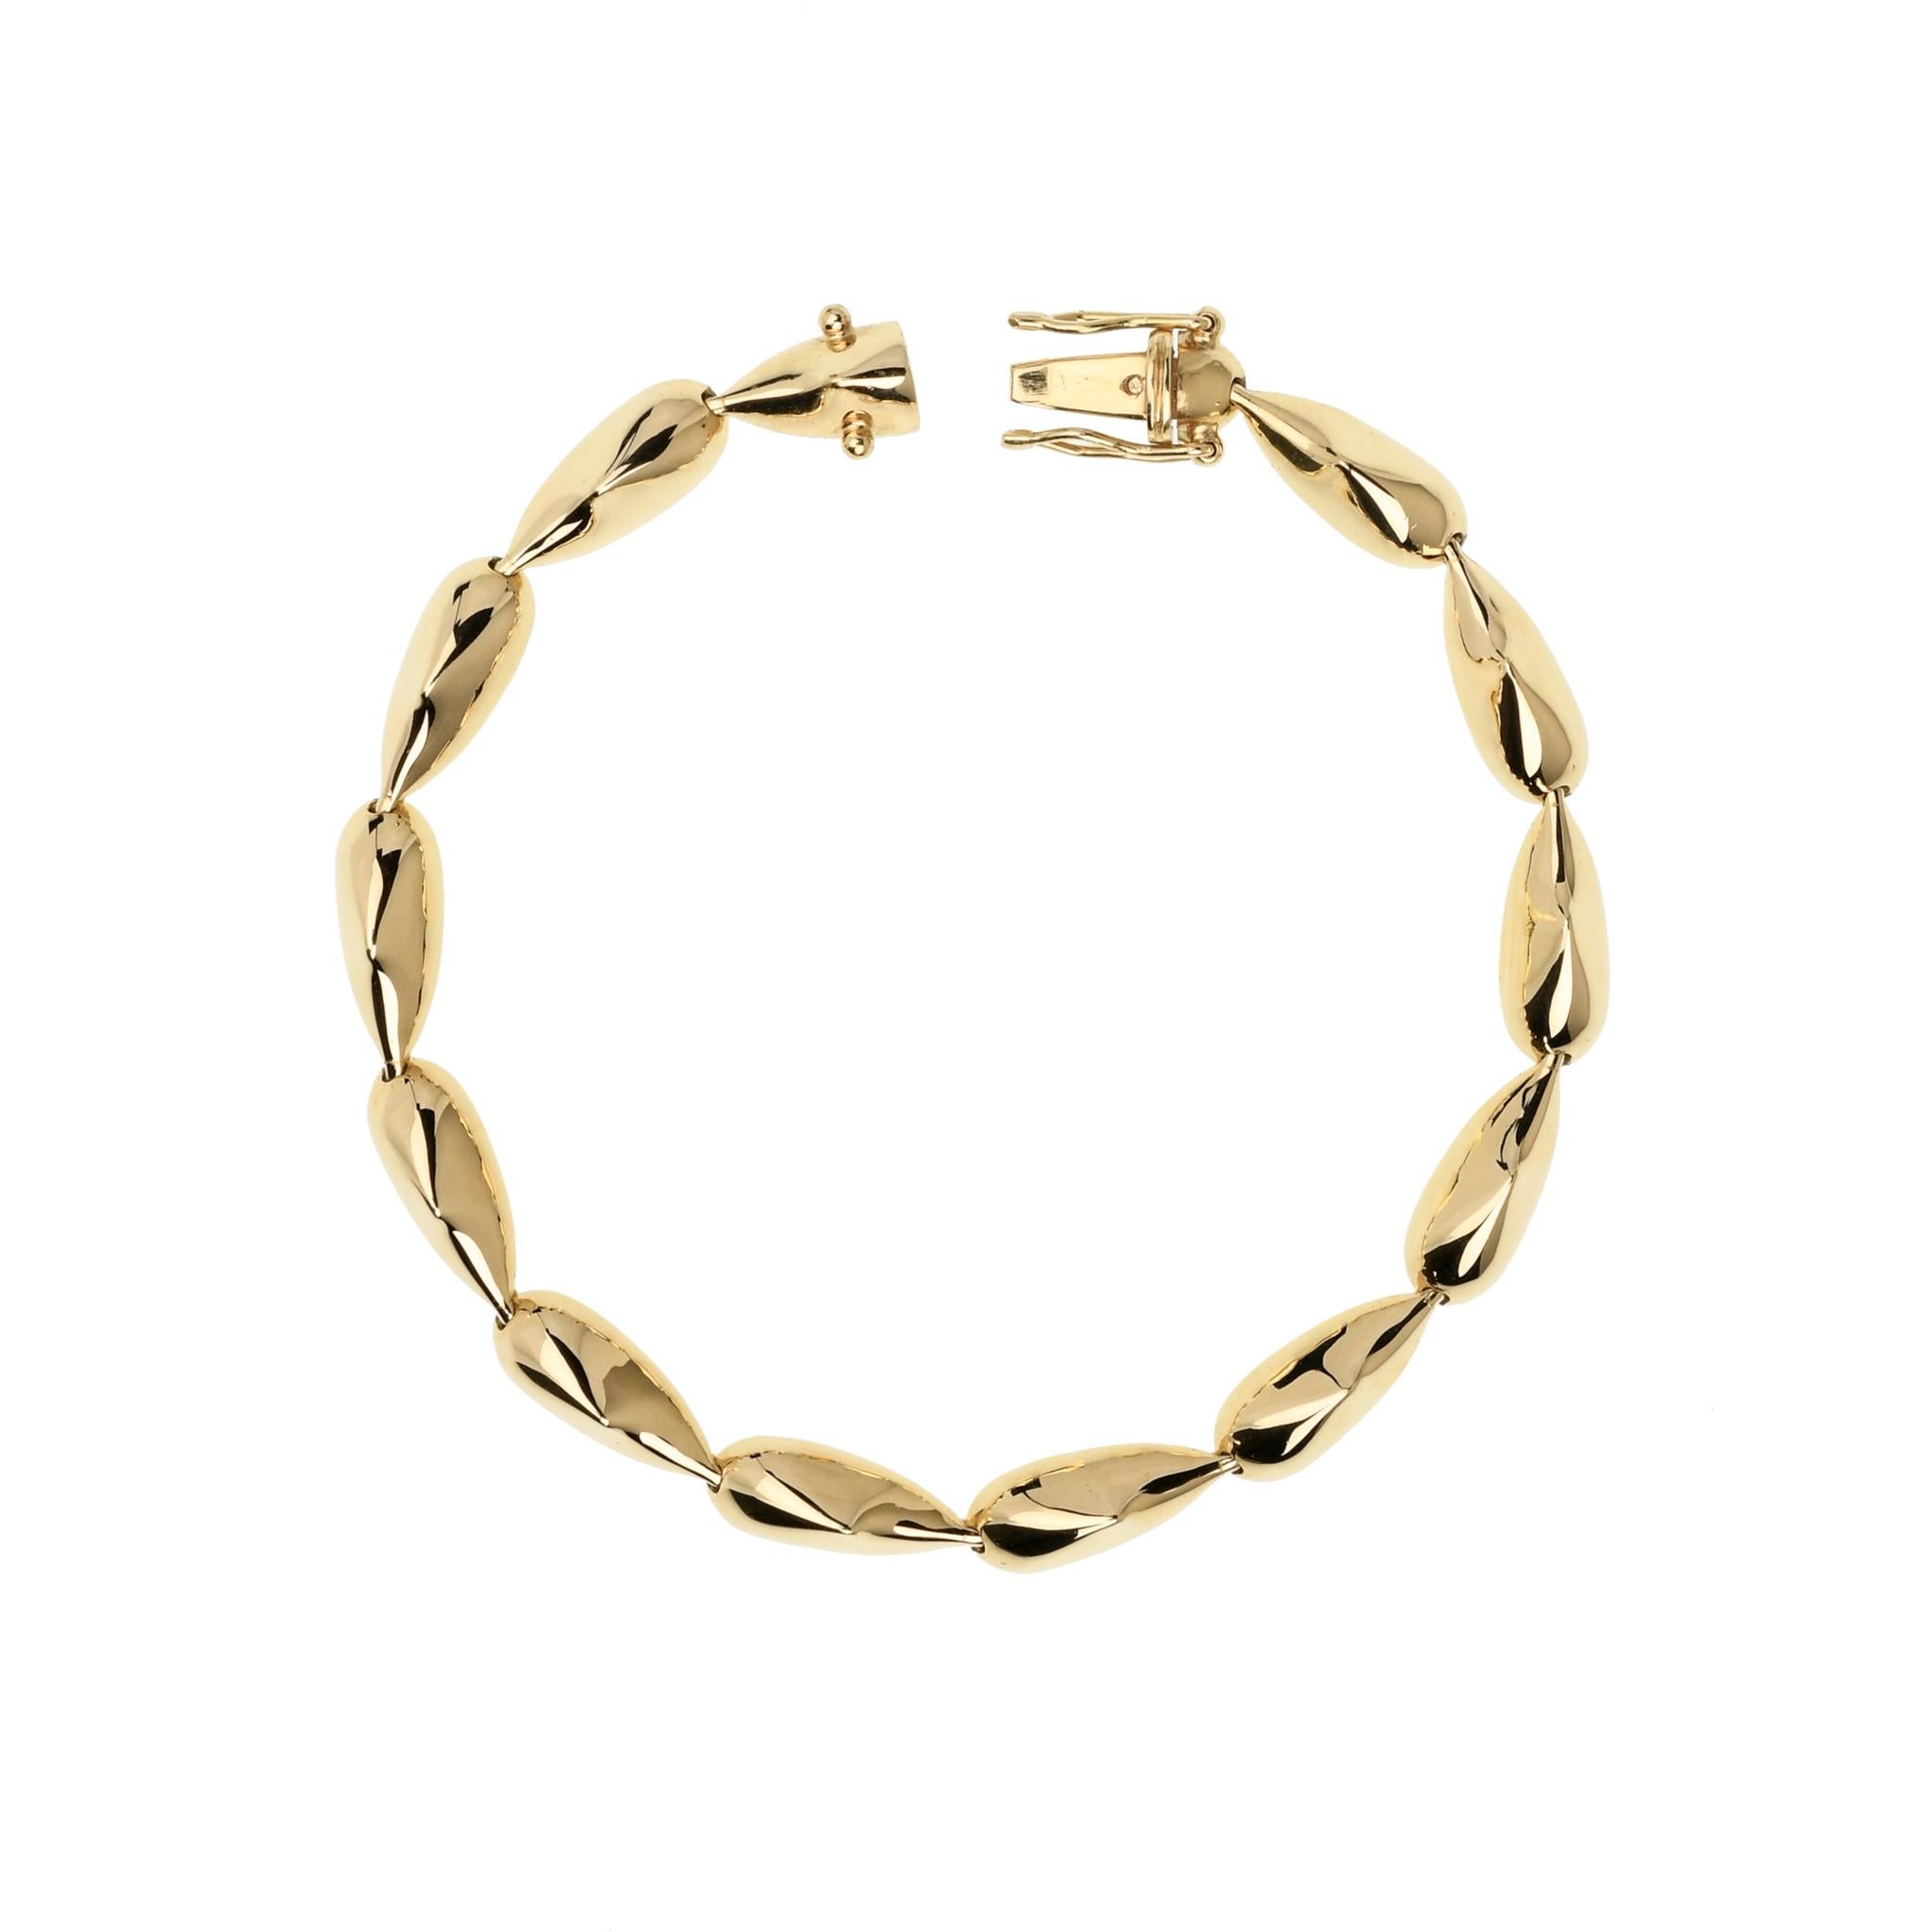 Maria Kotsoni Contemporary 18K Yellow Gold, Articulated Spike Link Bracelet For Sale